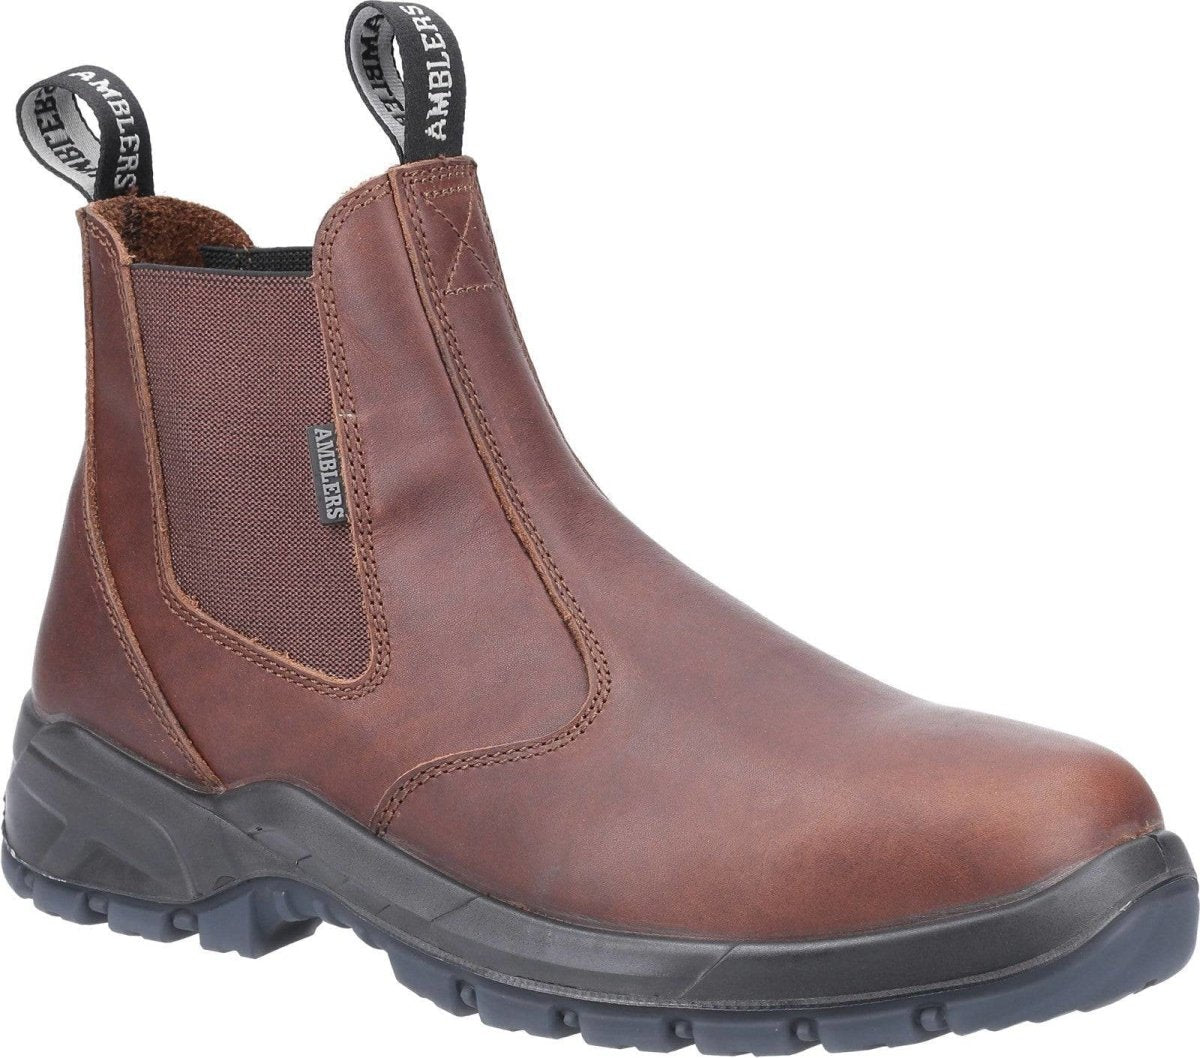 Amblers Ardwell Dealer Work Boots - Shoe Store Direct